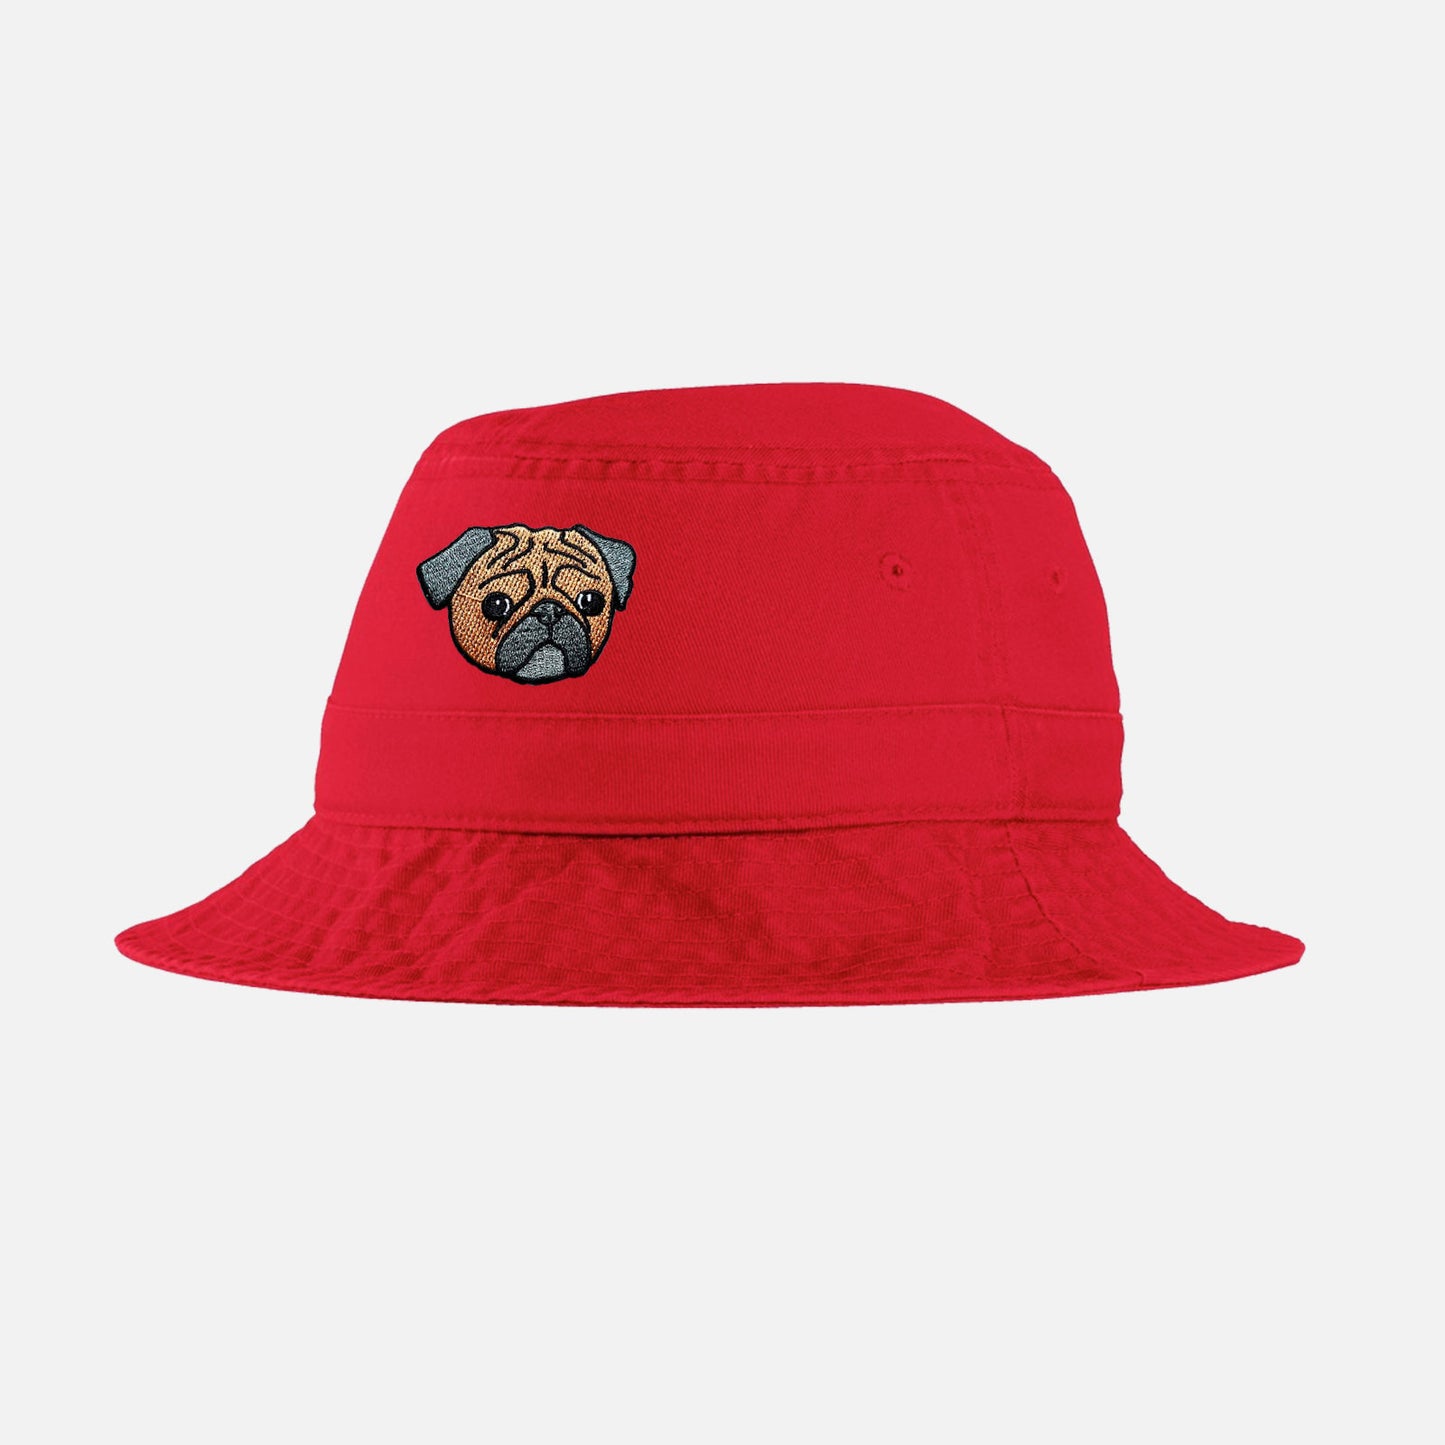 Red custom bucket hat with your dog, cat or pet embroidered on it.